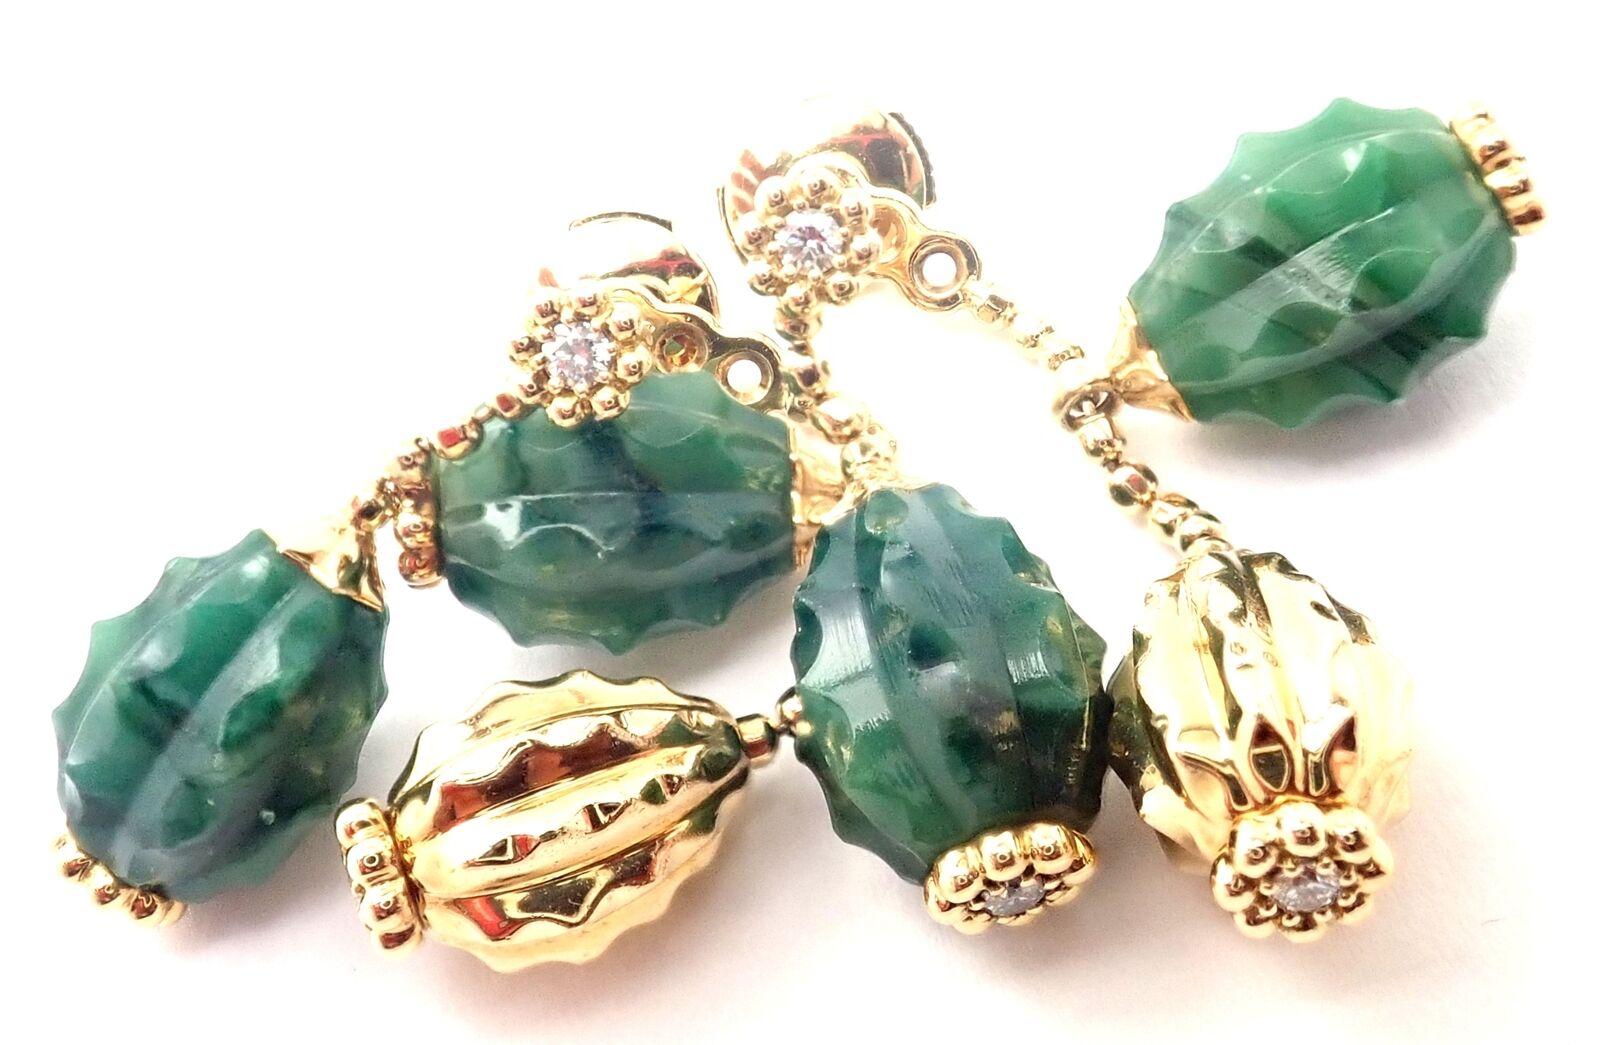 18k Yellow Gold Cactus de Cartier Diamond Aventurine Earrings by Cartier. 
With 8 round brilliant cut diamonds VS1 clarity, E color totaling weight approximately 0.14ct 
4 aventurine stones
These earrings are in like new condition and they come with